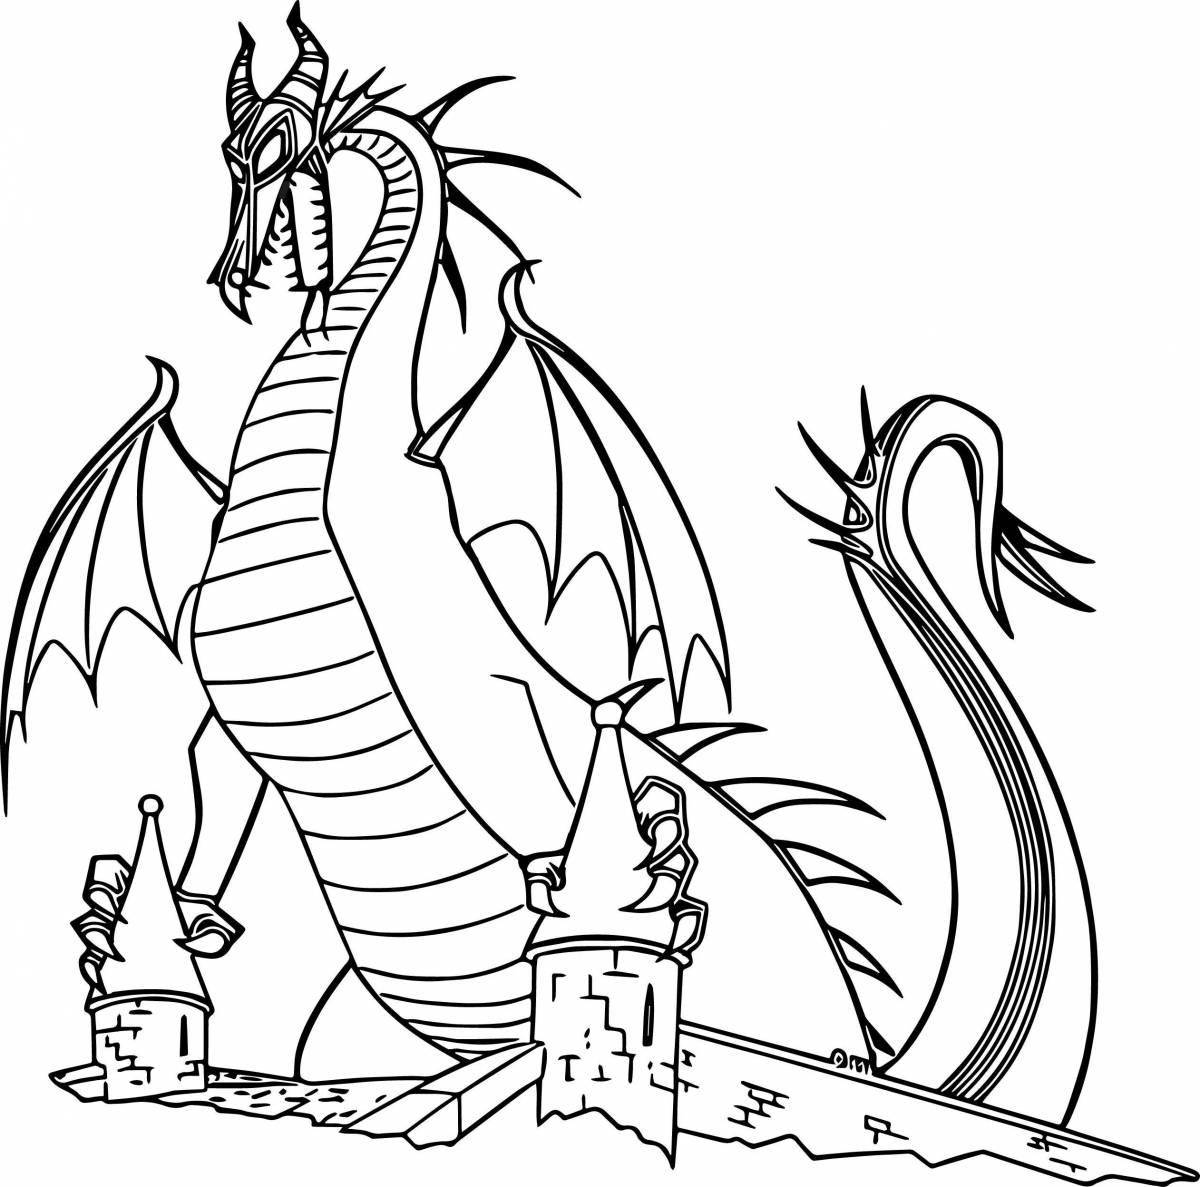 Odious coloring page dragon evil